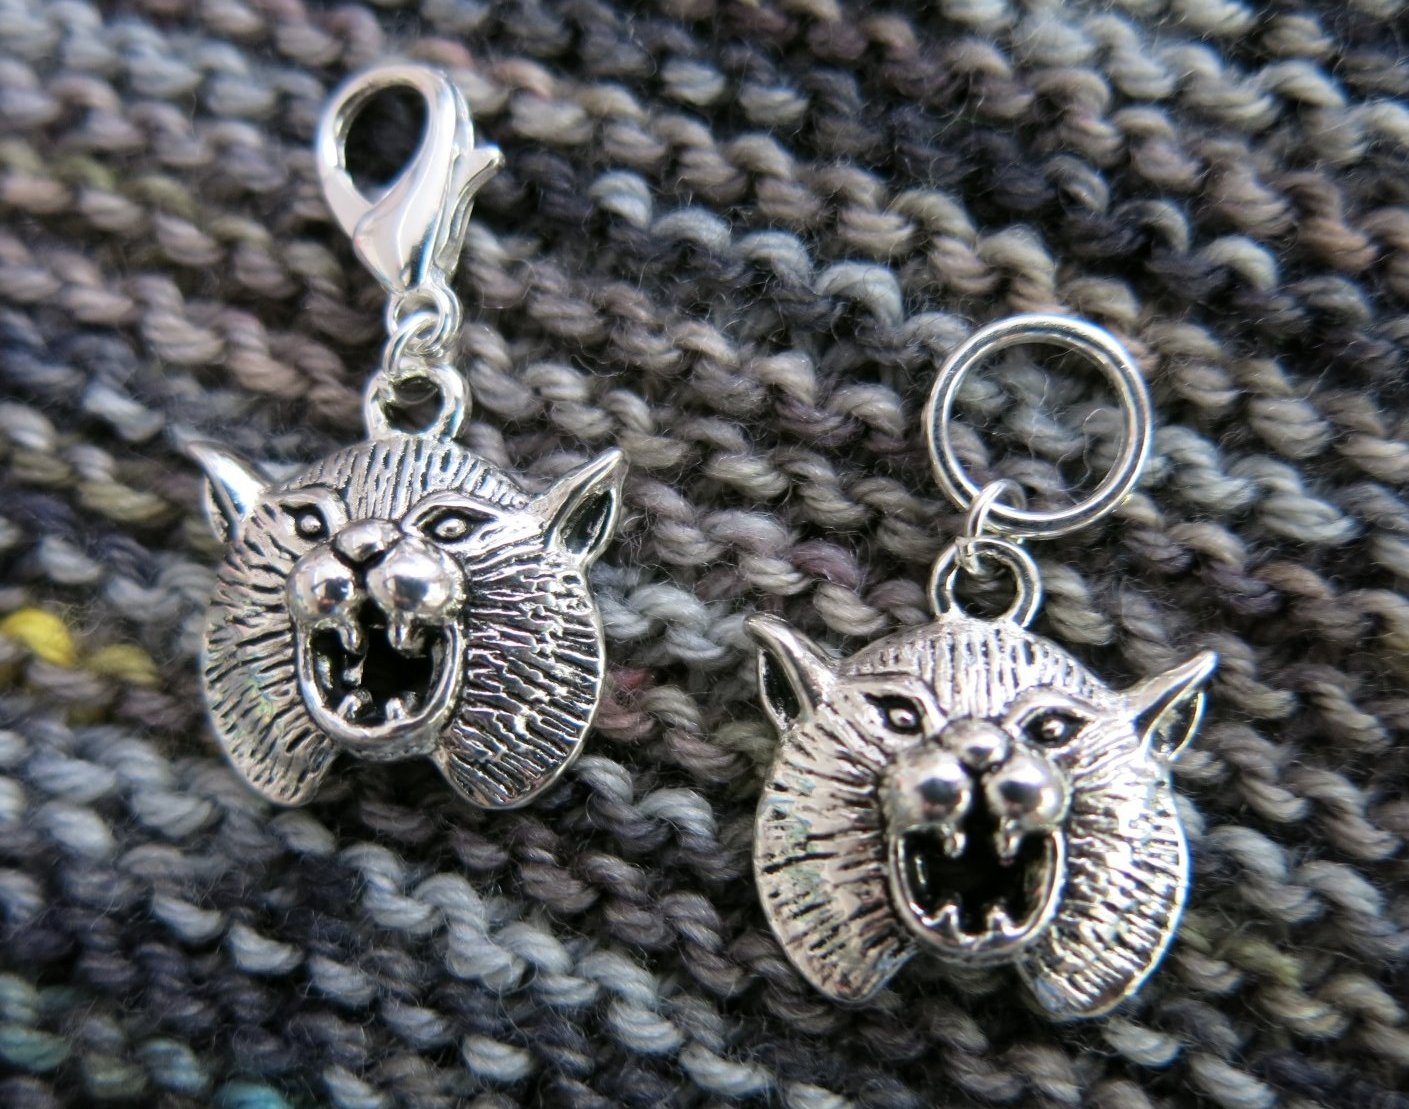 wild cat hanging charms for bracelets, bags, zippers and crochet projects